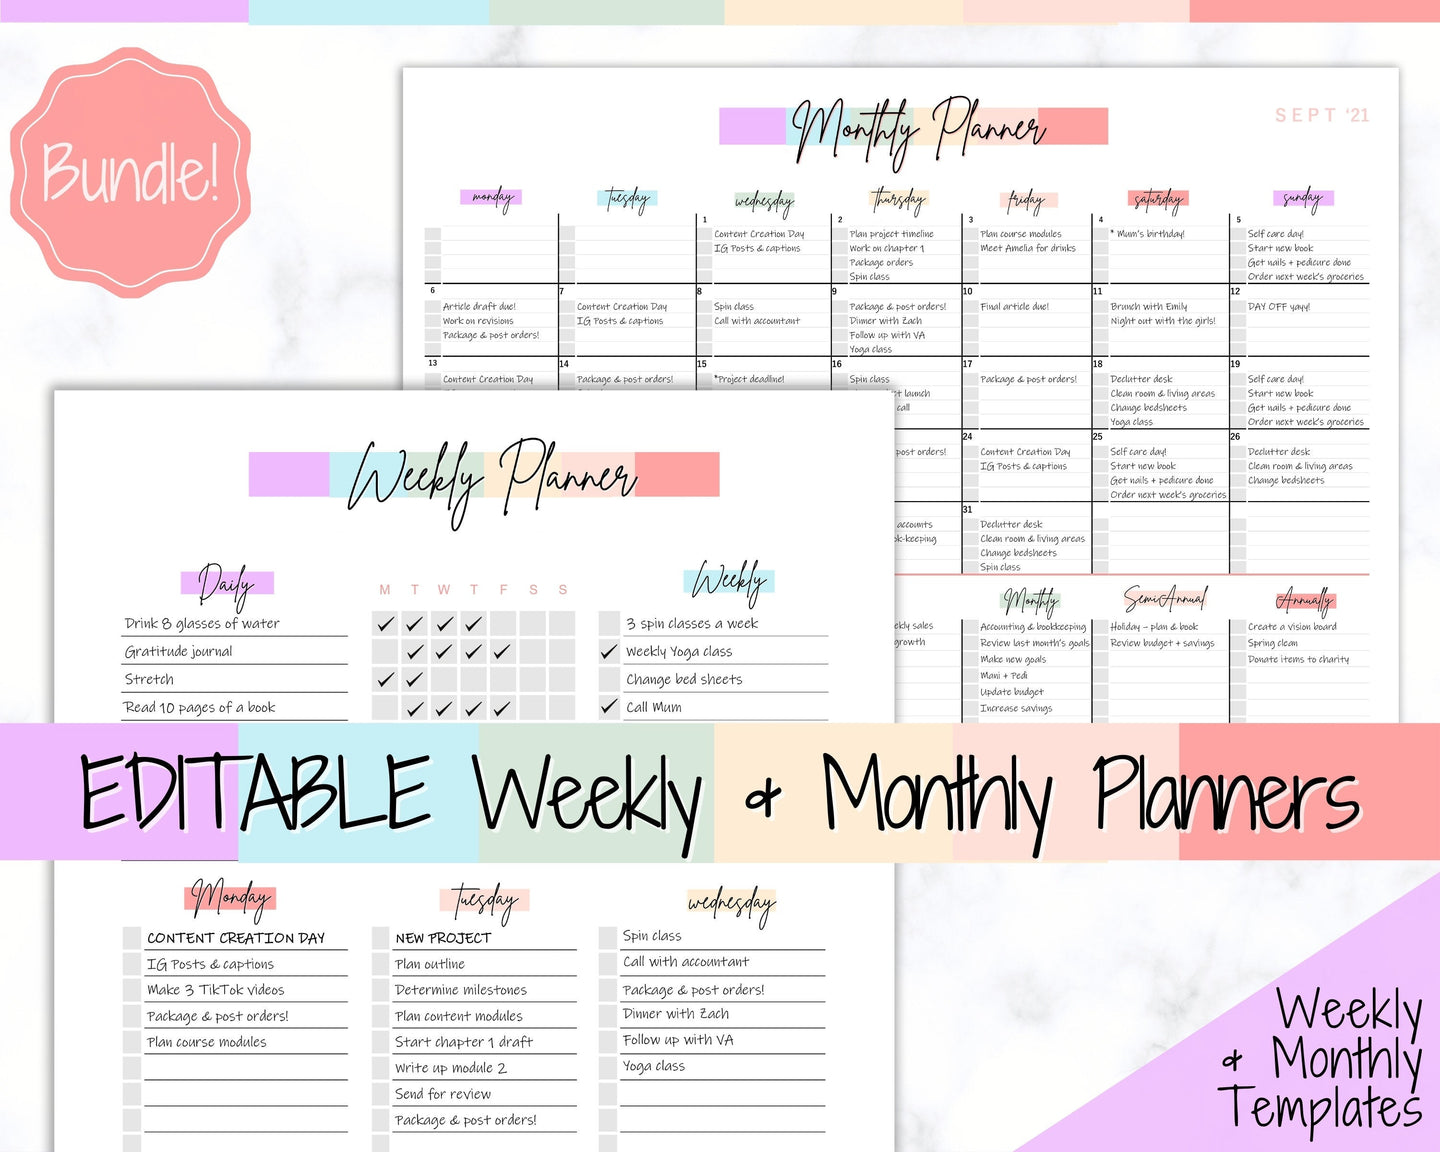 Student Planner, Editable Weekly & Monthly Planners, Weekly Planner Printable, To Do List, Teacher, Business Template, Schedule, Checklist